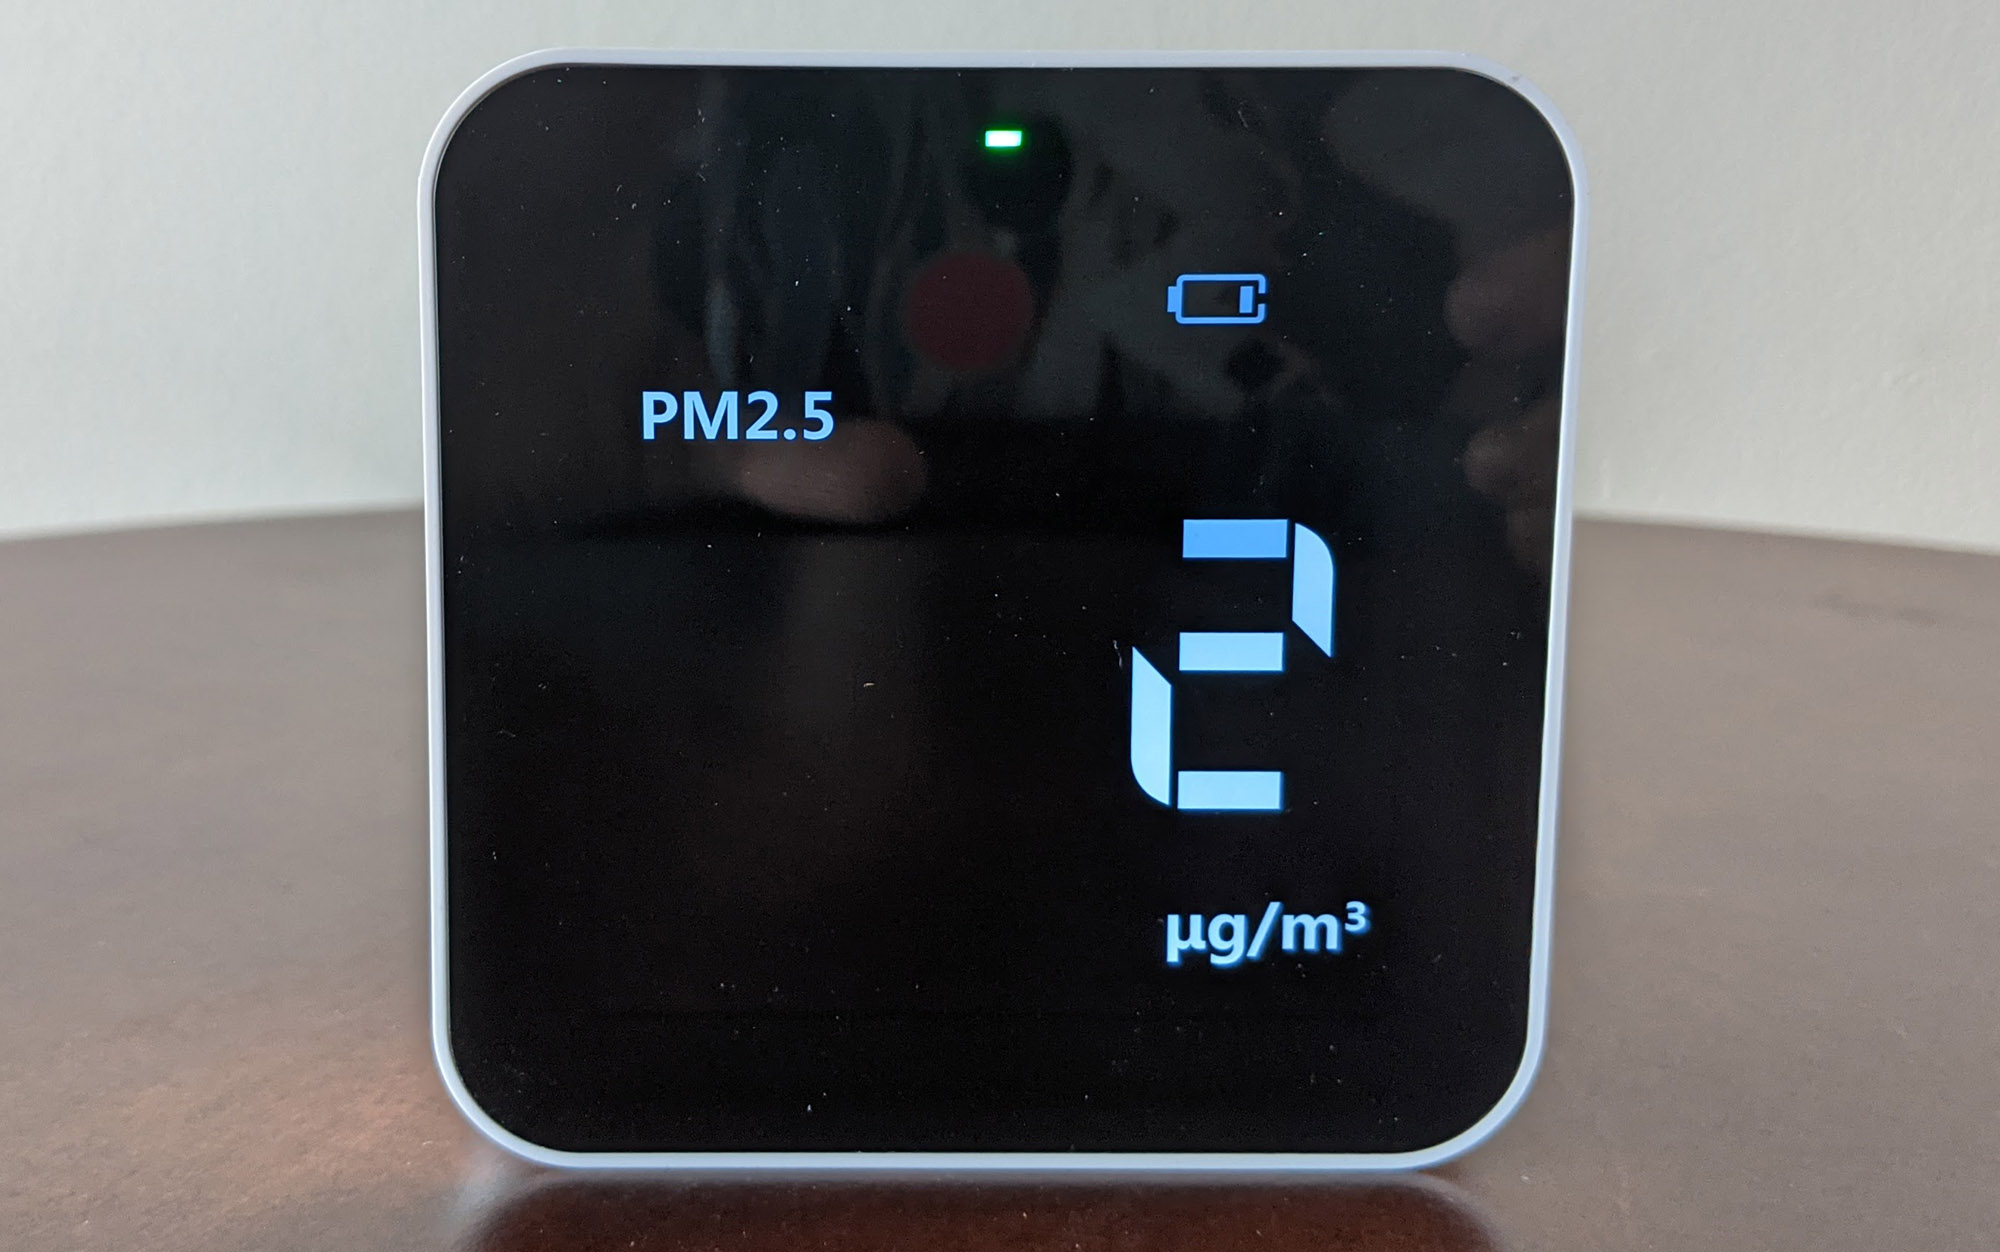 We tested the Temtop M10 Air Quality Monitor.